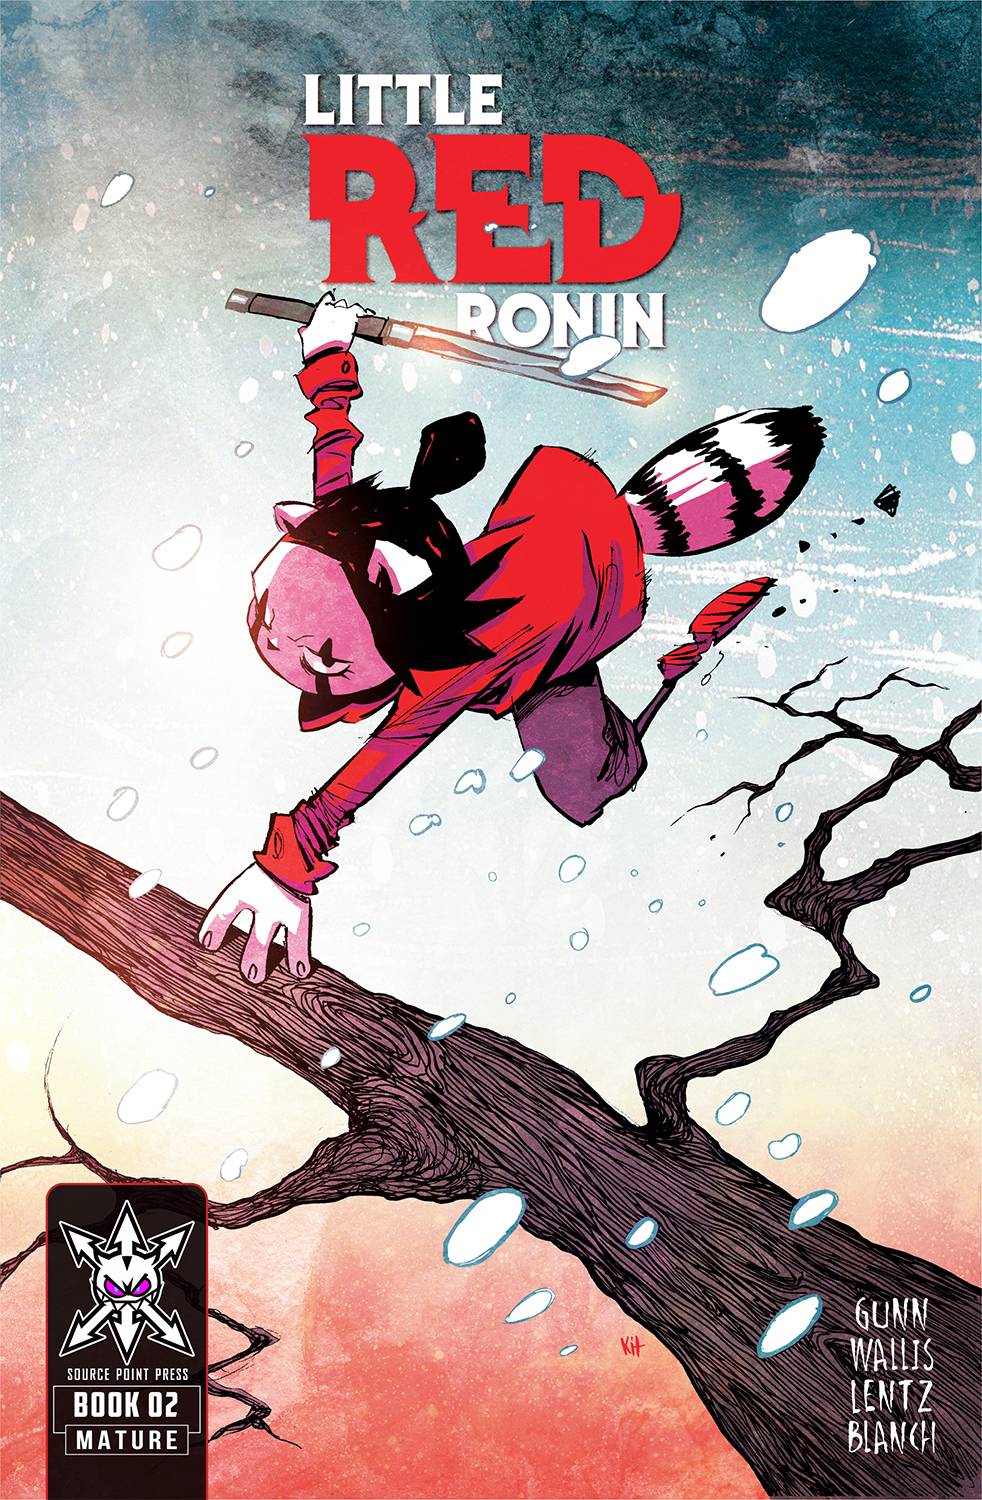 Little Red Ronin #2 (Cover A - Wallis)